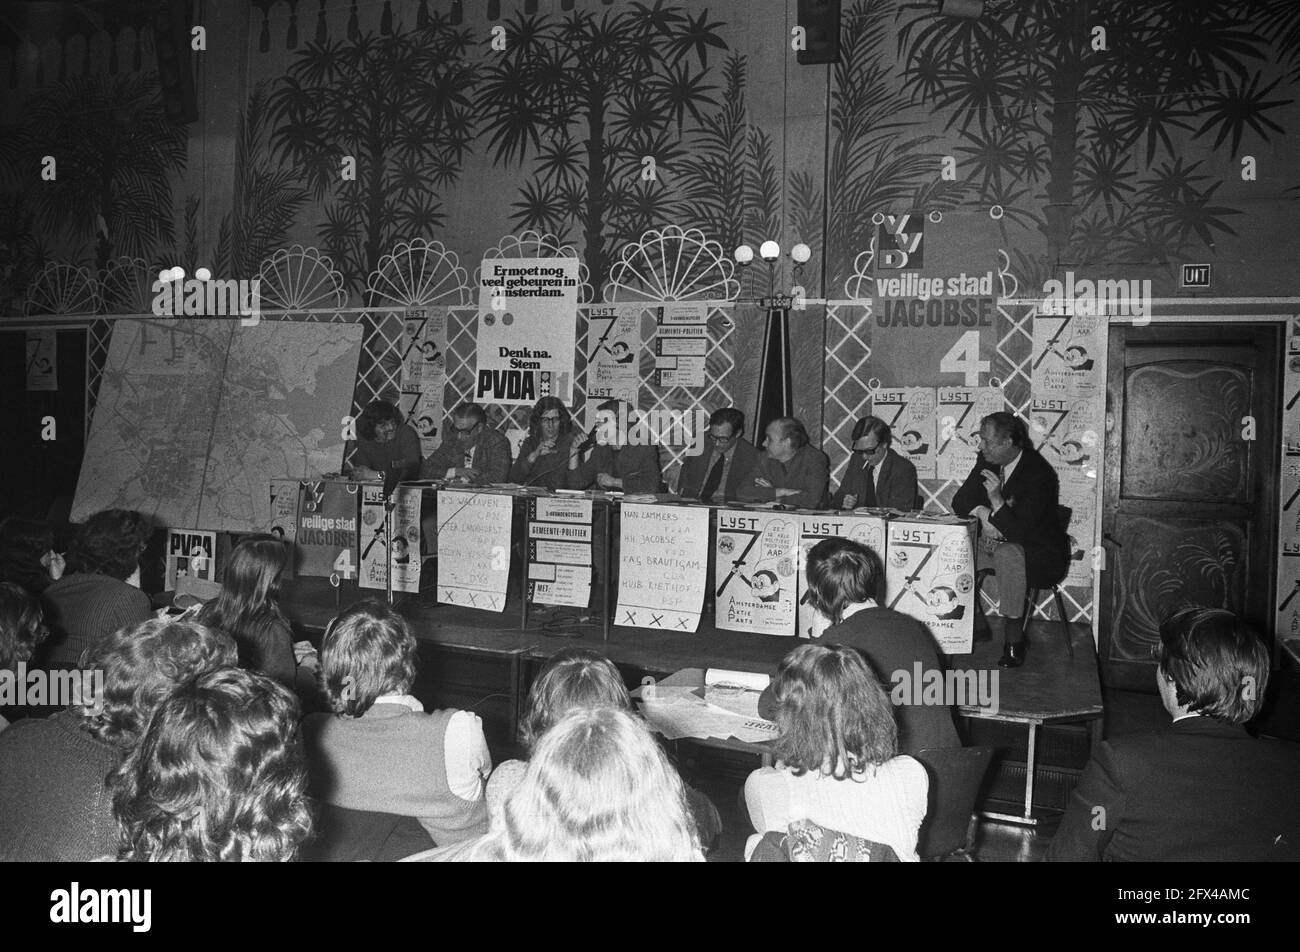 Debates on municipal politics in Amsterdam; Melvin Visser, Martini, Lankhorst, Leeuwers Walraven, Brautigam and Jacobs, May 7, 1974, Debates, The Netherlands, 20th century press agency photo, news to remember, documentary, historic photography 1945-1990, visual stories, human history of the Twentieth Century, capturing moments in time Stock Photo